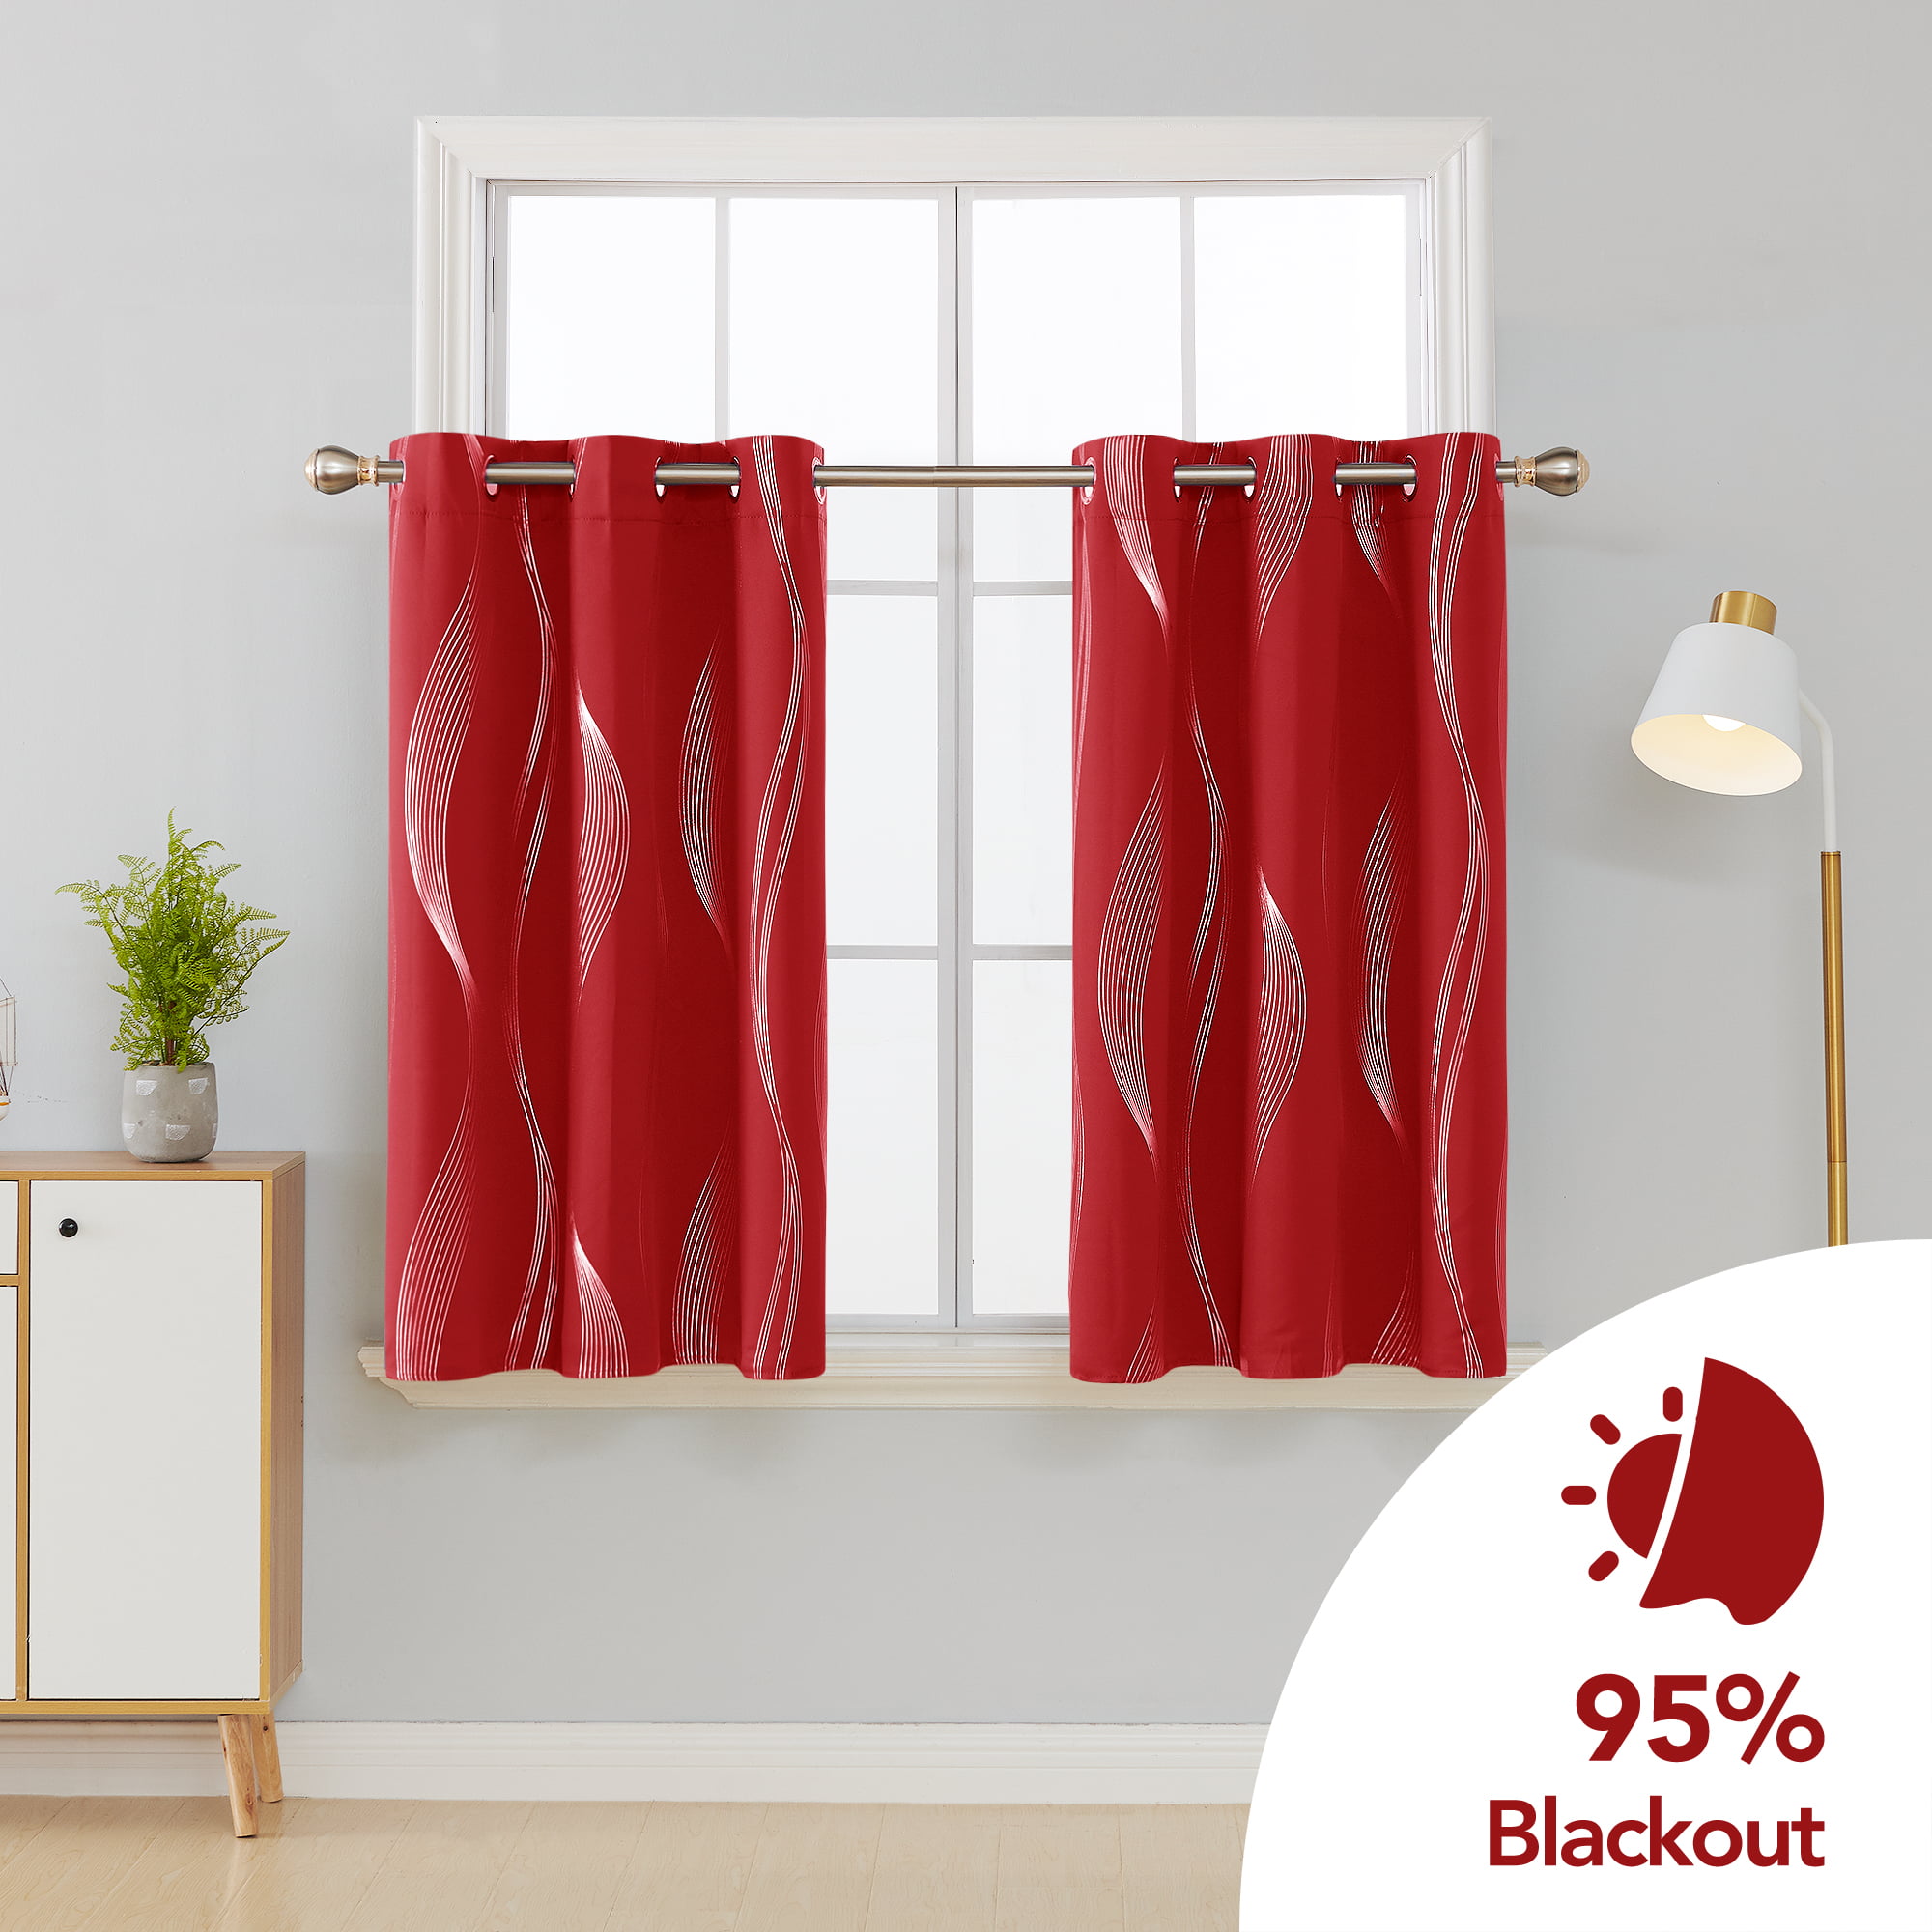 Deconovo Home Decorative Solid Curtains Blackout Curtains Thermal Insulated Eyelet Curtains for Girls Bedroom Red 42 x 54 Inch 2 Panels 